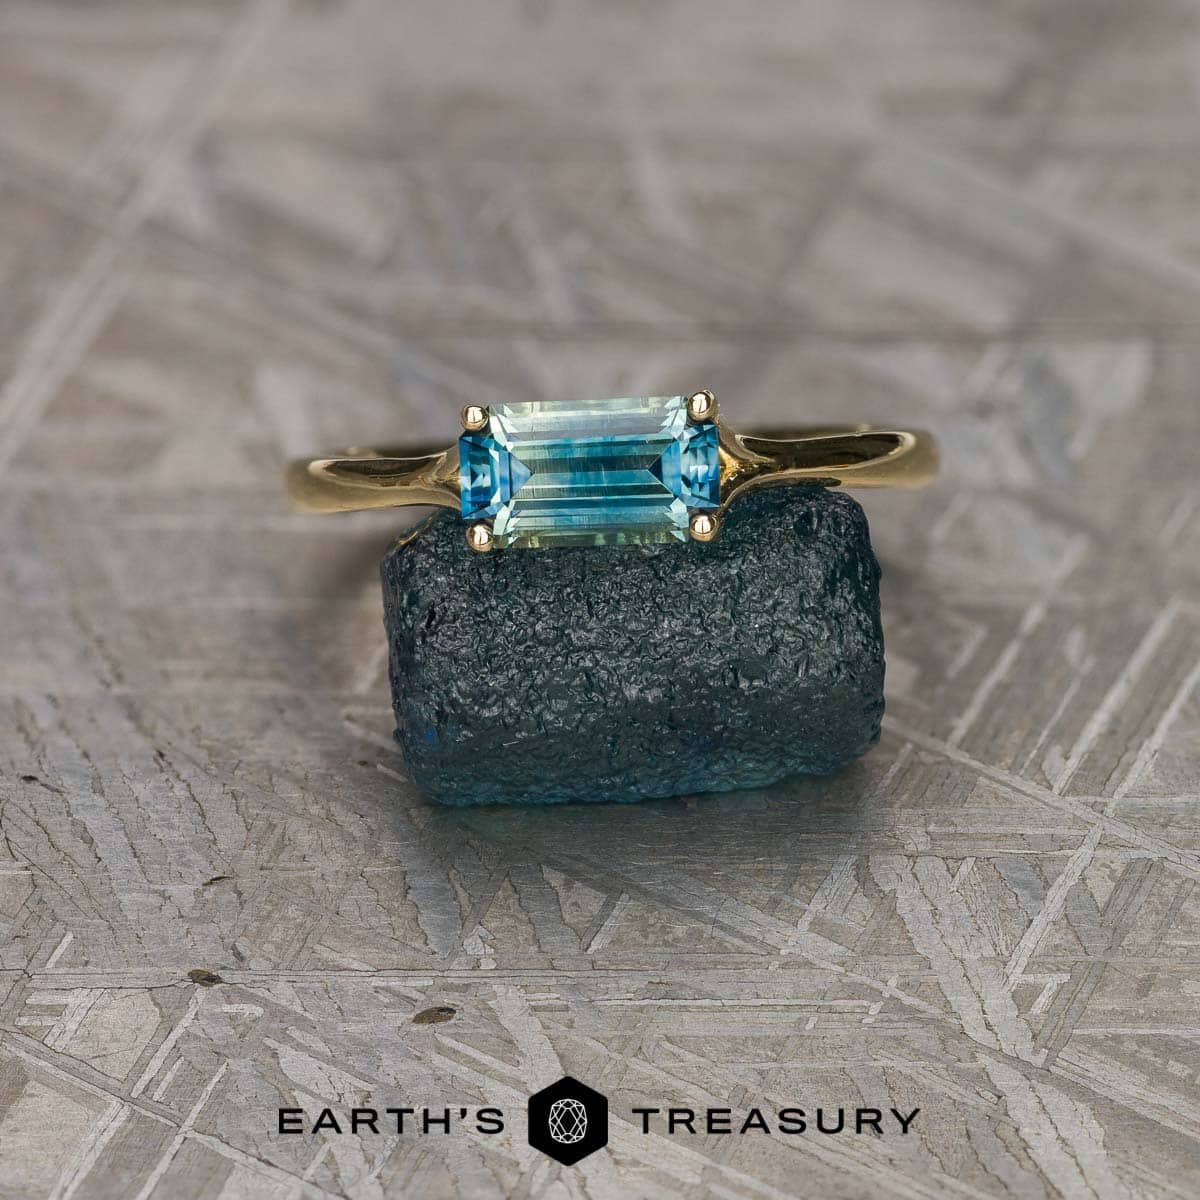 The "Daphne" Ring in 14k yellow gold with 0.92-Carat Montana Sapphire